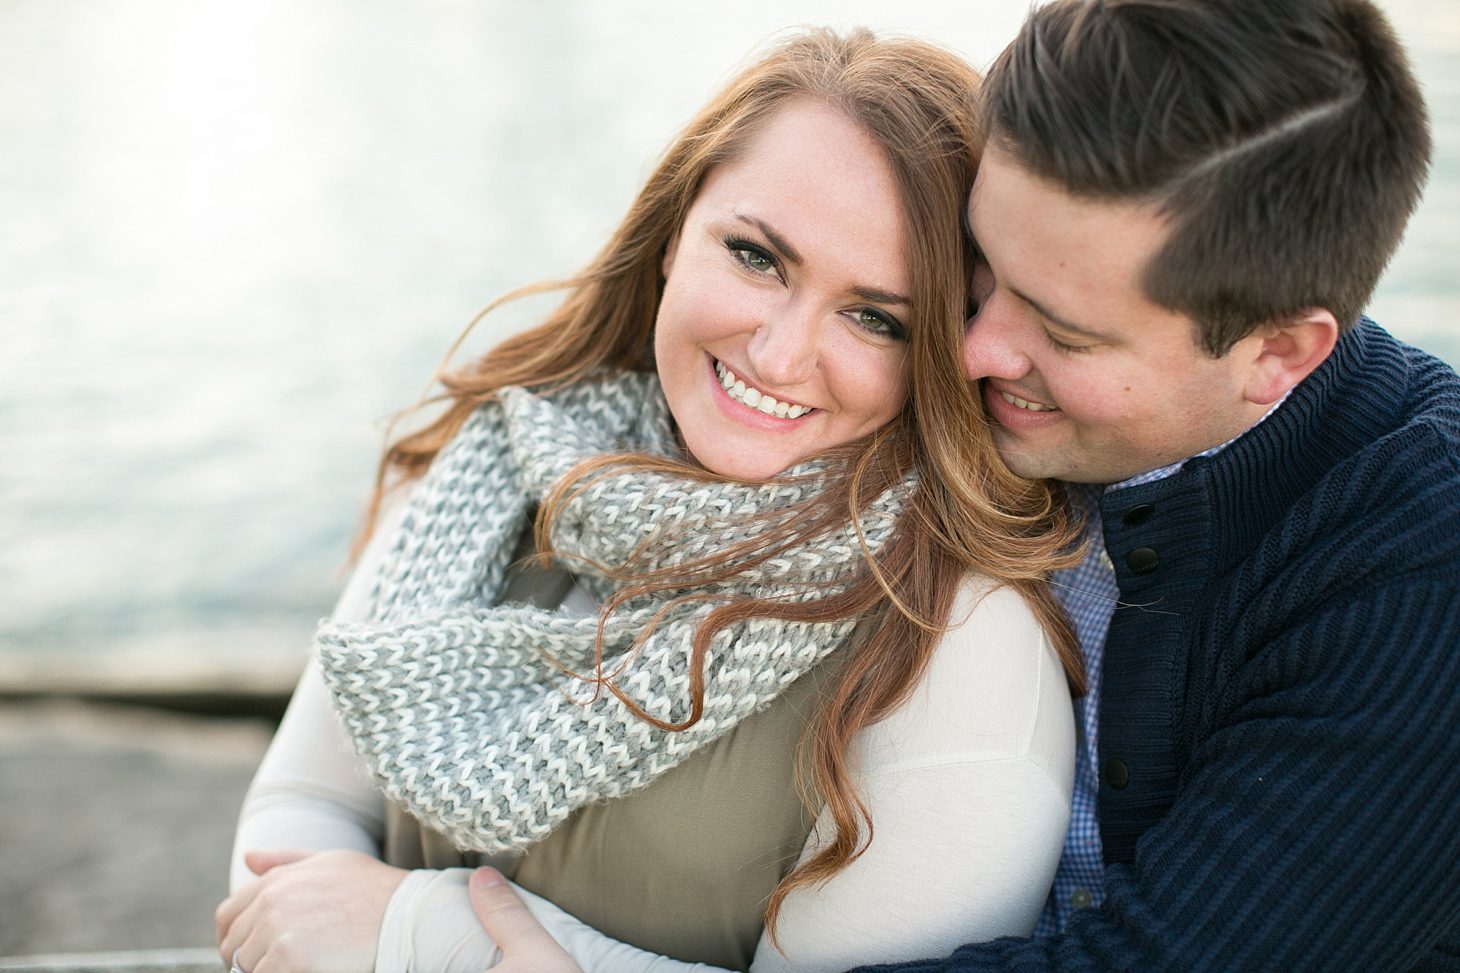 olive-park-engagement-photos-by-christy-tyler-photography_0019